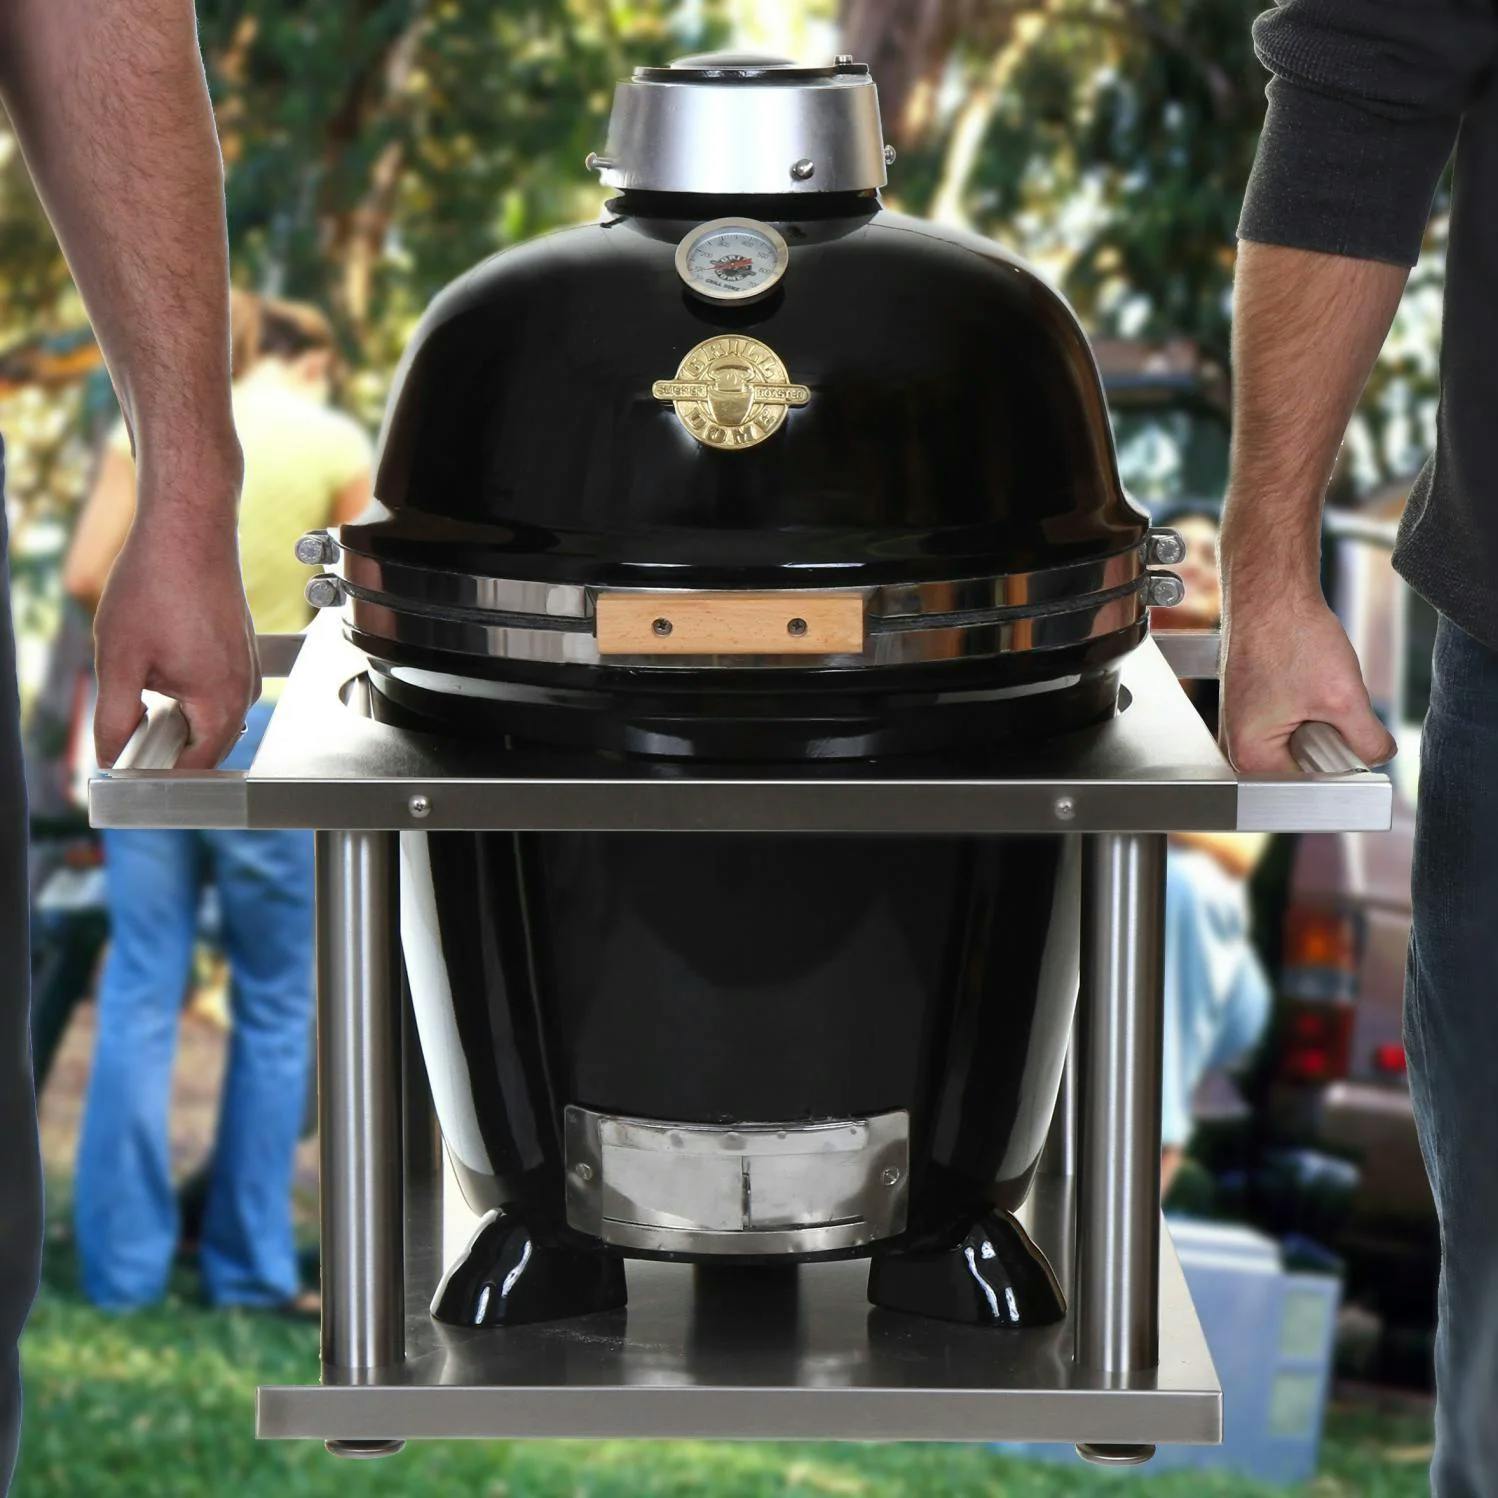 BBQGuys Signature Kamagater Portable Tailgating Kamado Carrier for 16 in. Grills